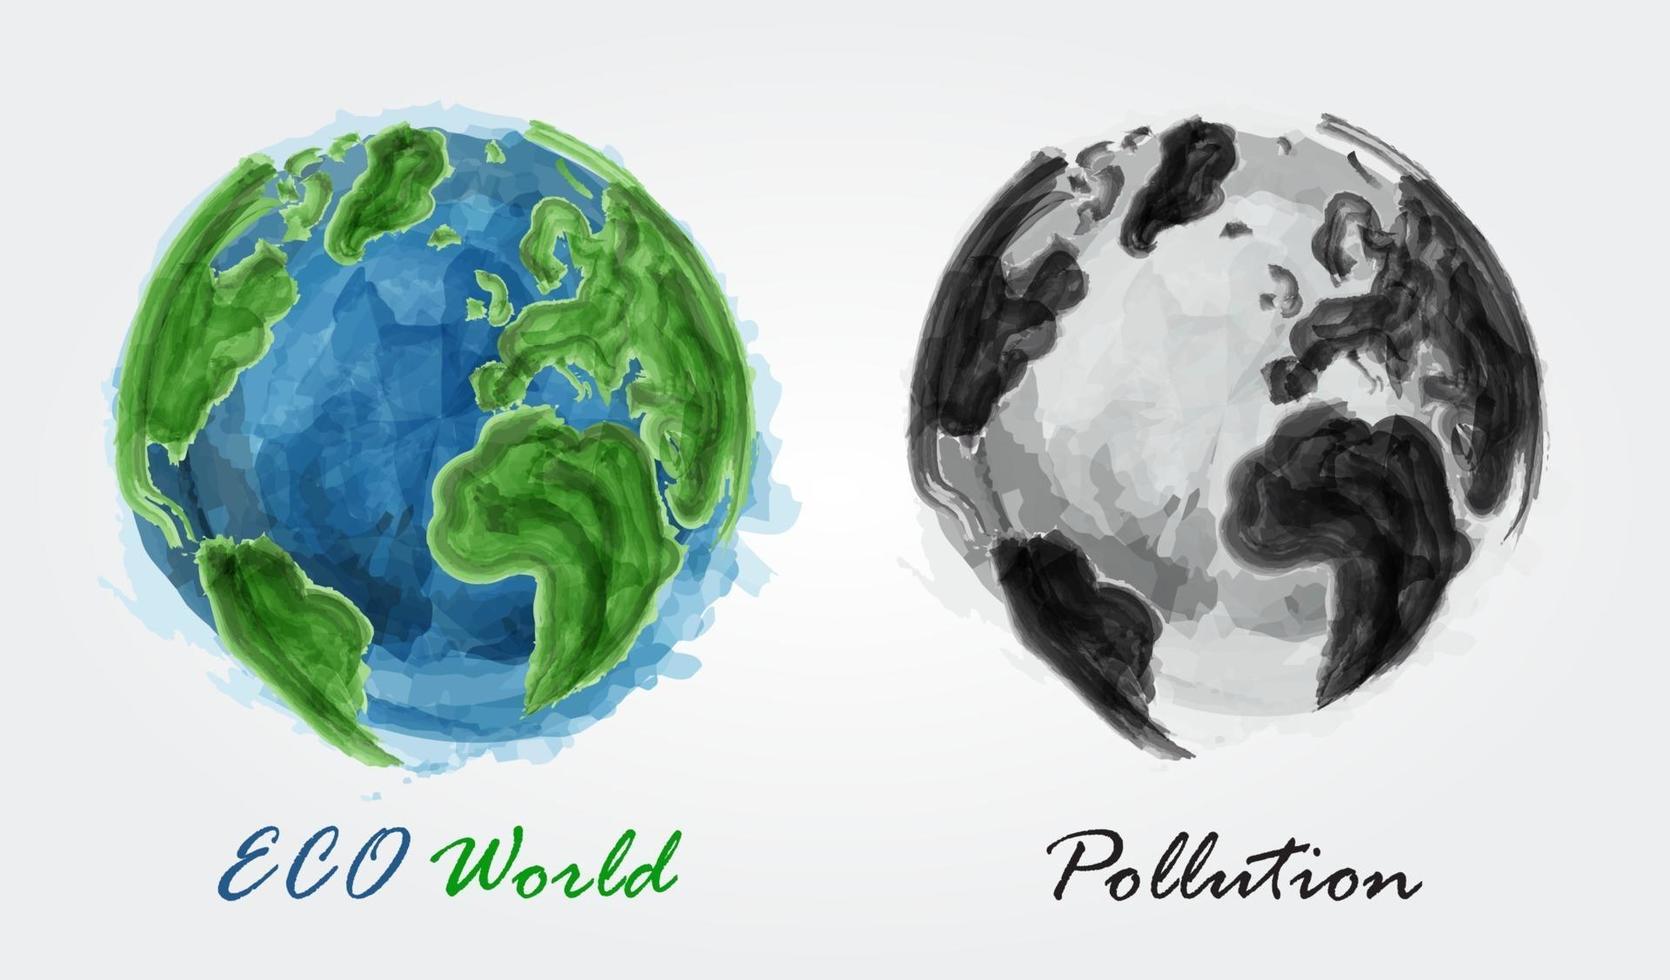 ECO world and Pollution  Watercolor painting design  Ecological concept  Vector